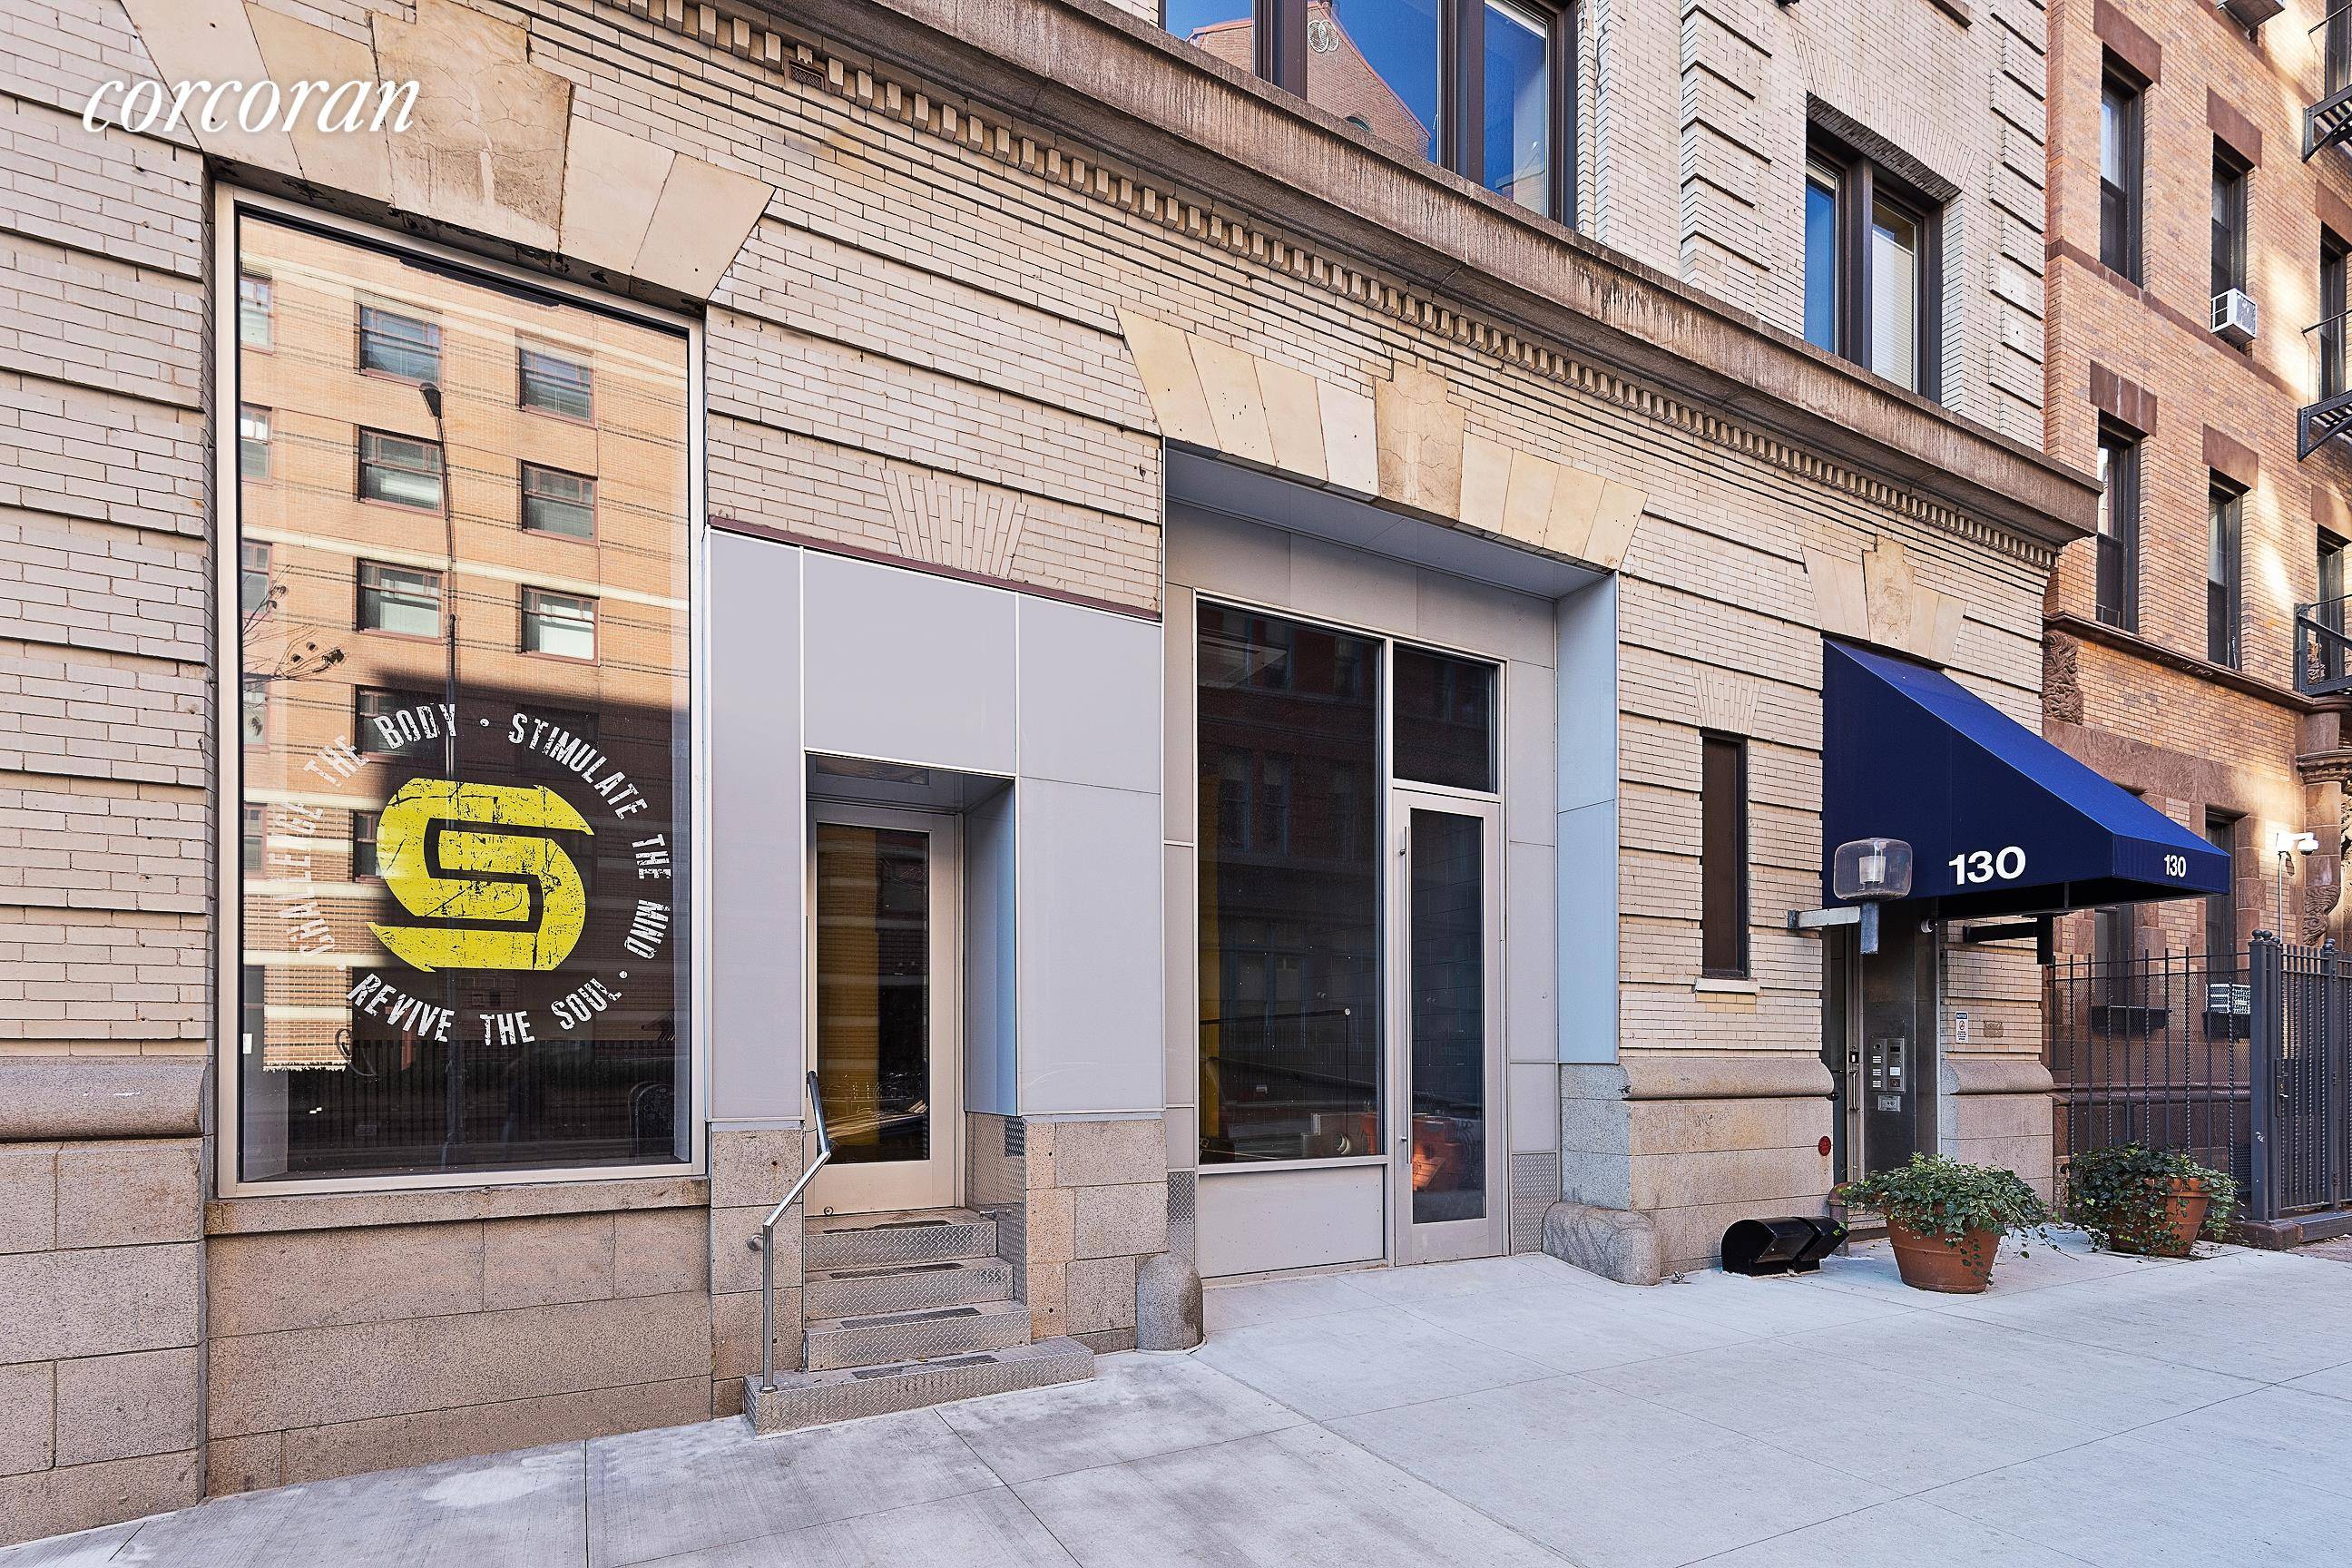 East Village ground floor commercial condominium for sale at 130 East 12th Street.